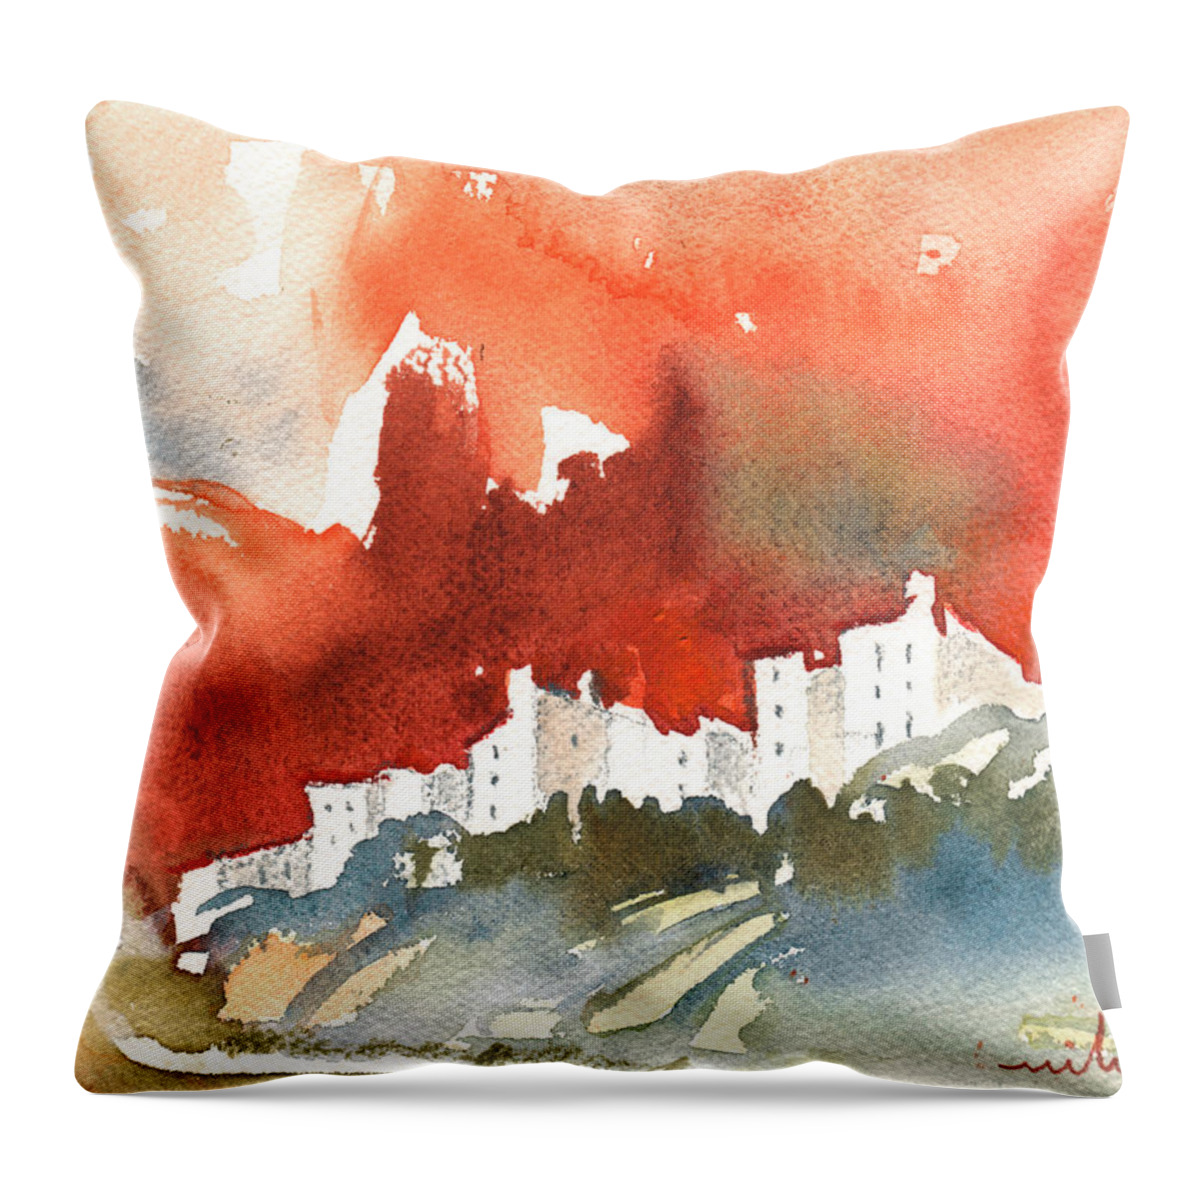 Travel Throw Pillow featuring the painting The Menerbes Where Nicolas de Stael lived by Miki De Goodaboom